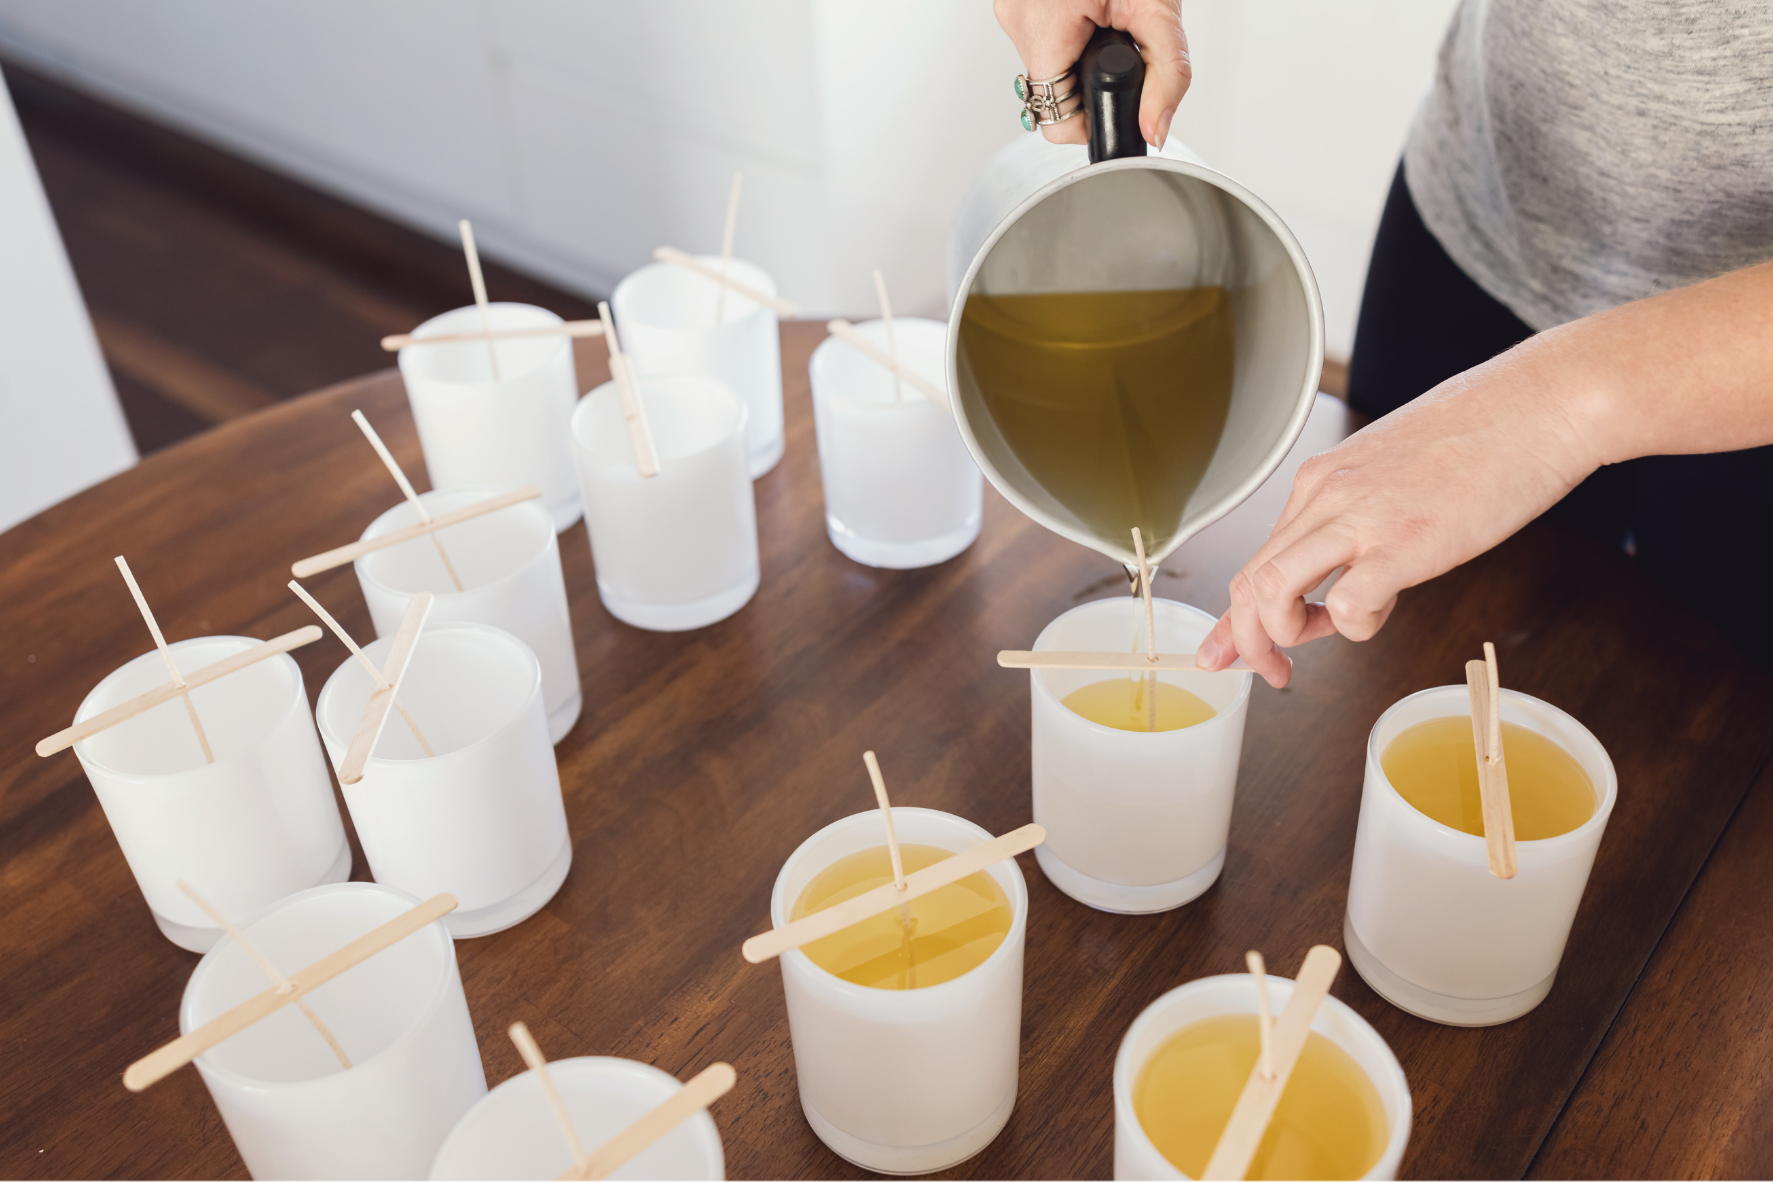 Candle Making 101 - A Girl Who Needs To Craft